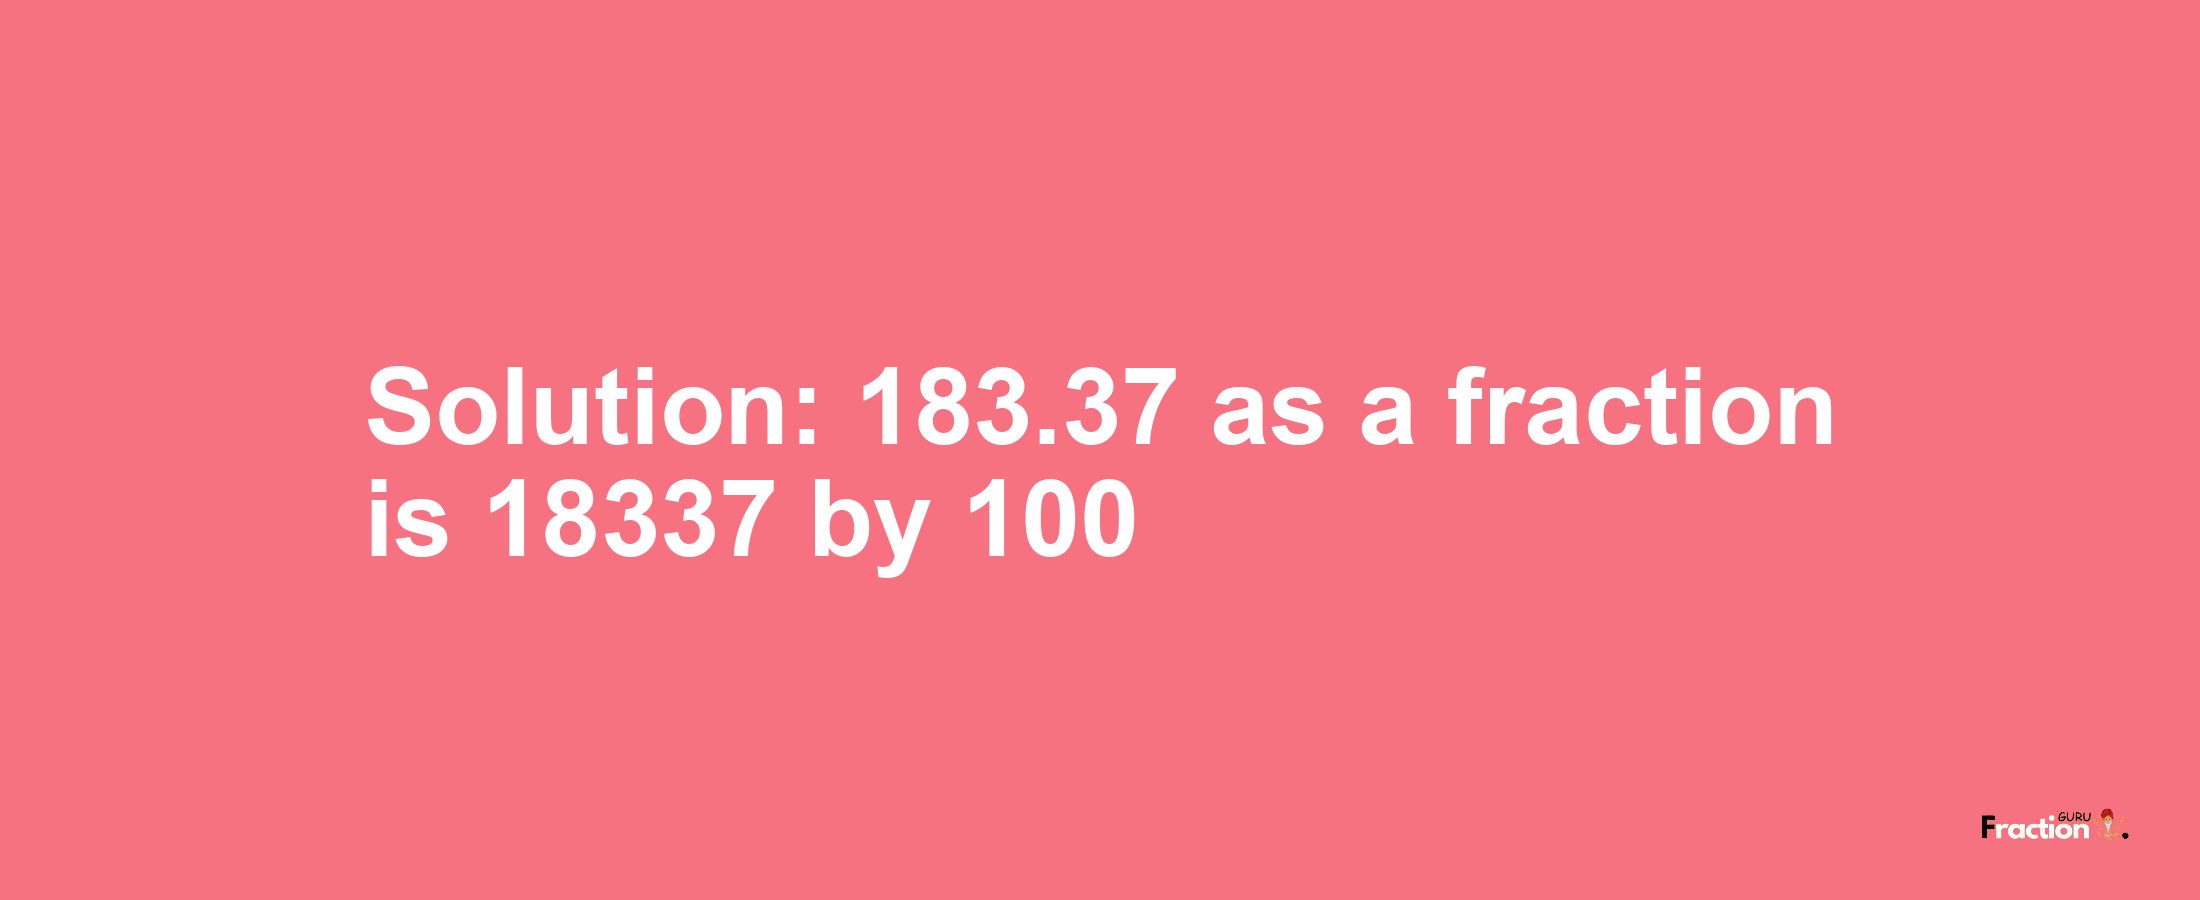 Solution:183.37 as a fraction is 18337/100